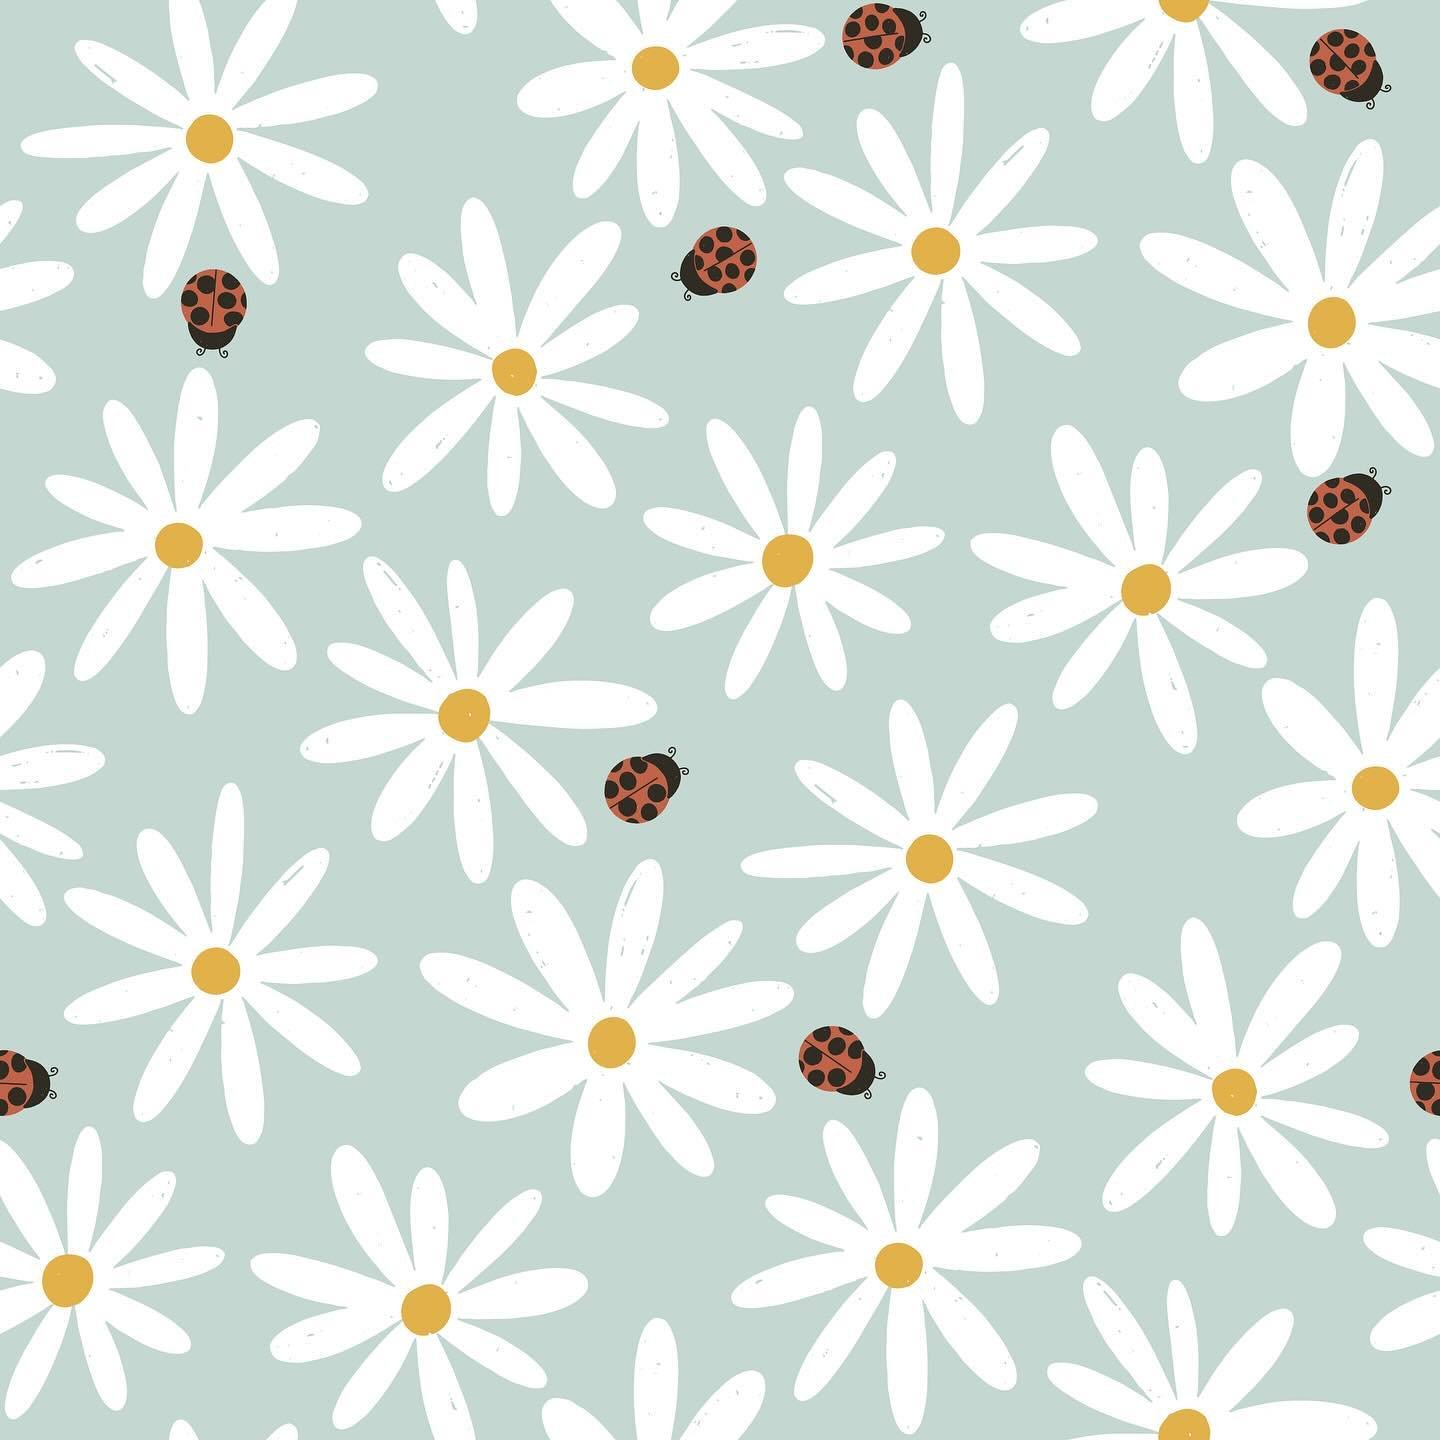 My niece calls all lady bugs &ldquo;Steve&rdquo; so of course I had to add some Steves to my #DoodleaDayMay Daisy print 😂🐞 

Available on fabric, wallpaper, and home decor on @spoonflower now!!

#spoonflowerfabric #spoonflowerartist #daisy #kidsfab